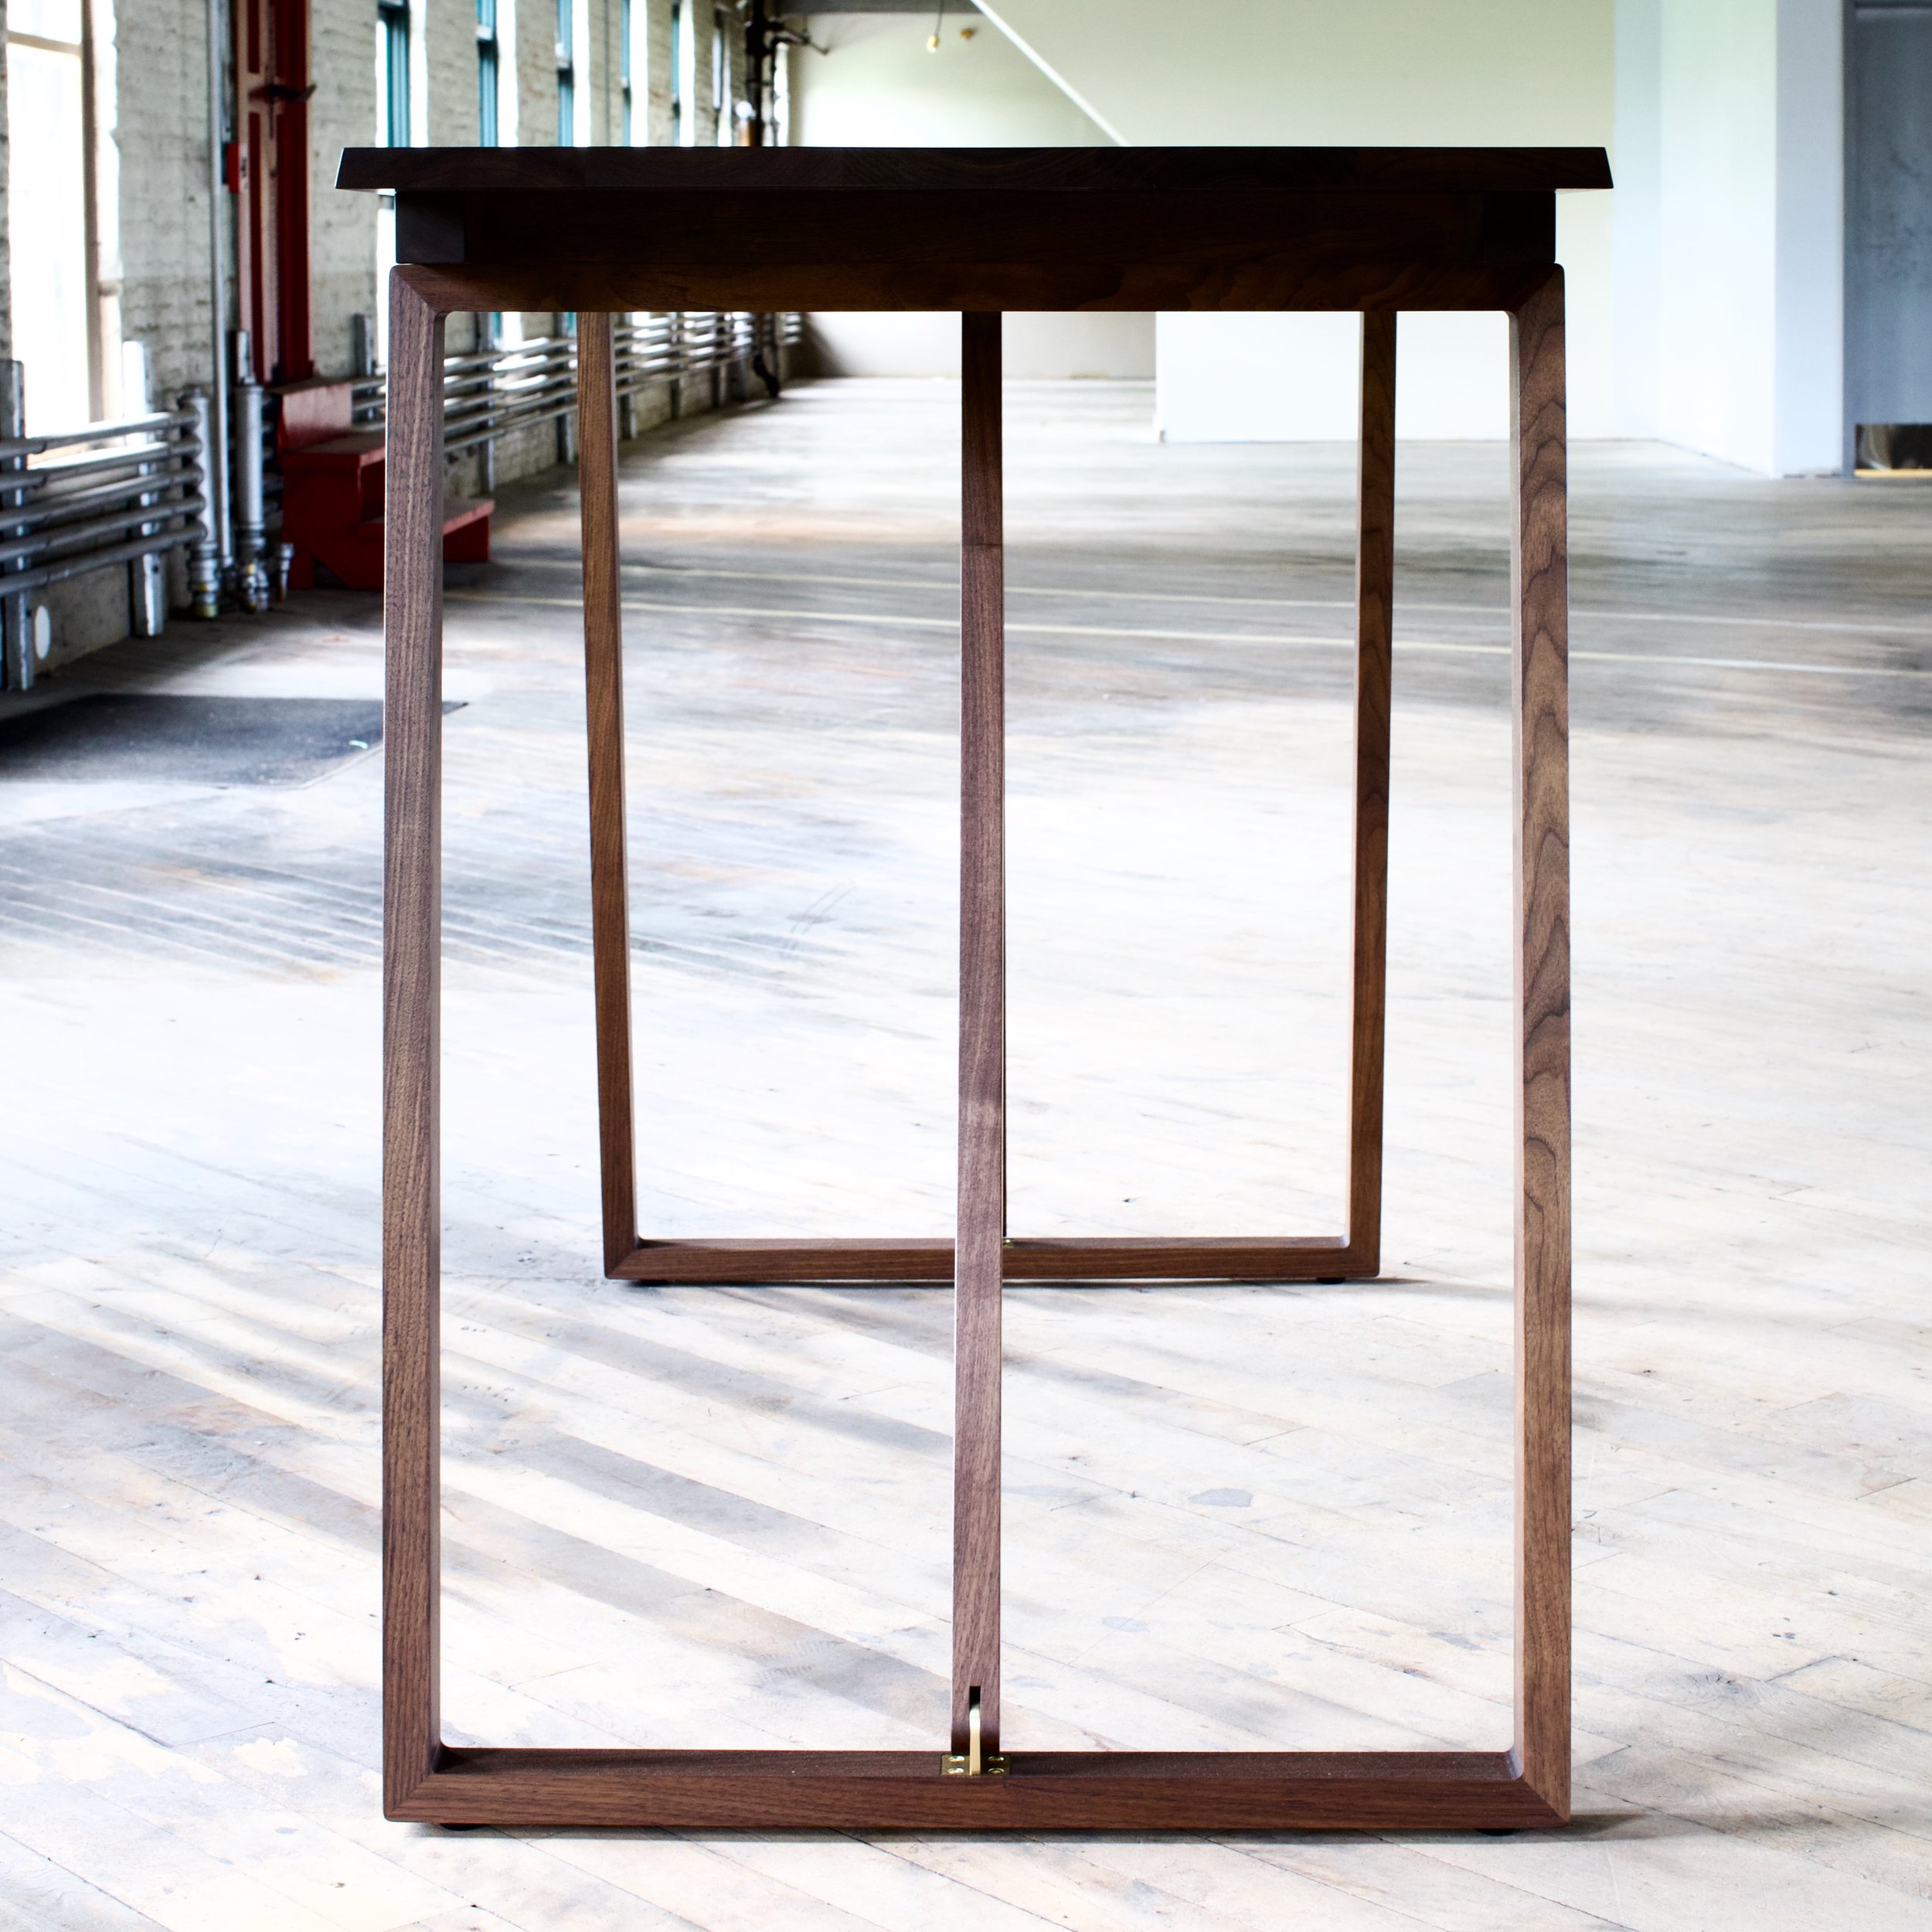   66” W x 30” D x 42” H    Marrakesh Stained Walnut with leather blotter and satin brass hardware    11  